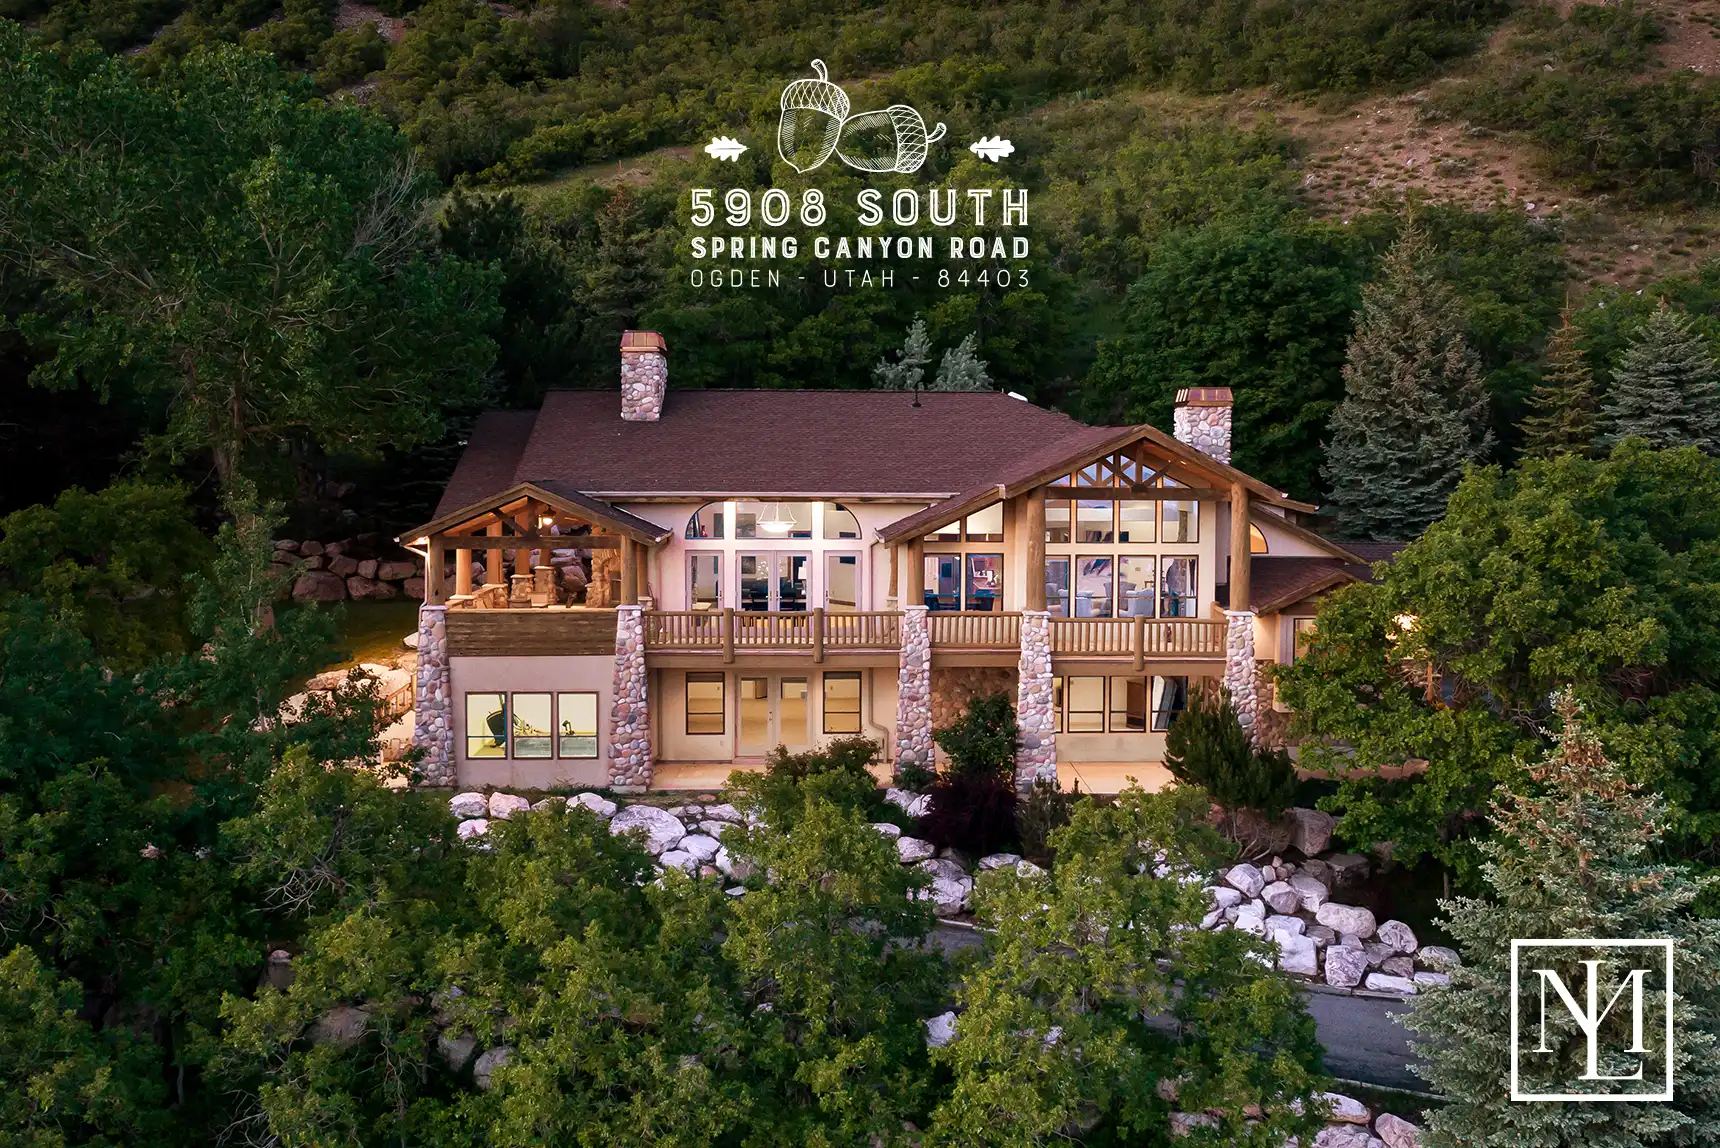 hero image for blog * SOLD * Elevated Mountainside Luxury at 5908 Spring Canyon Road, Ogden, UT 84403